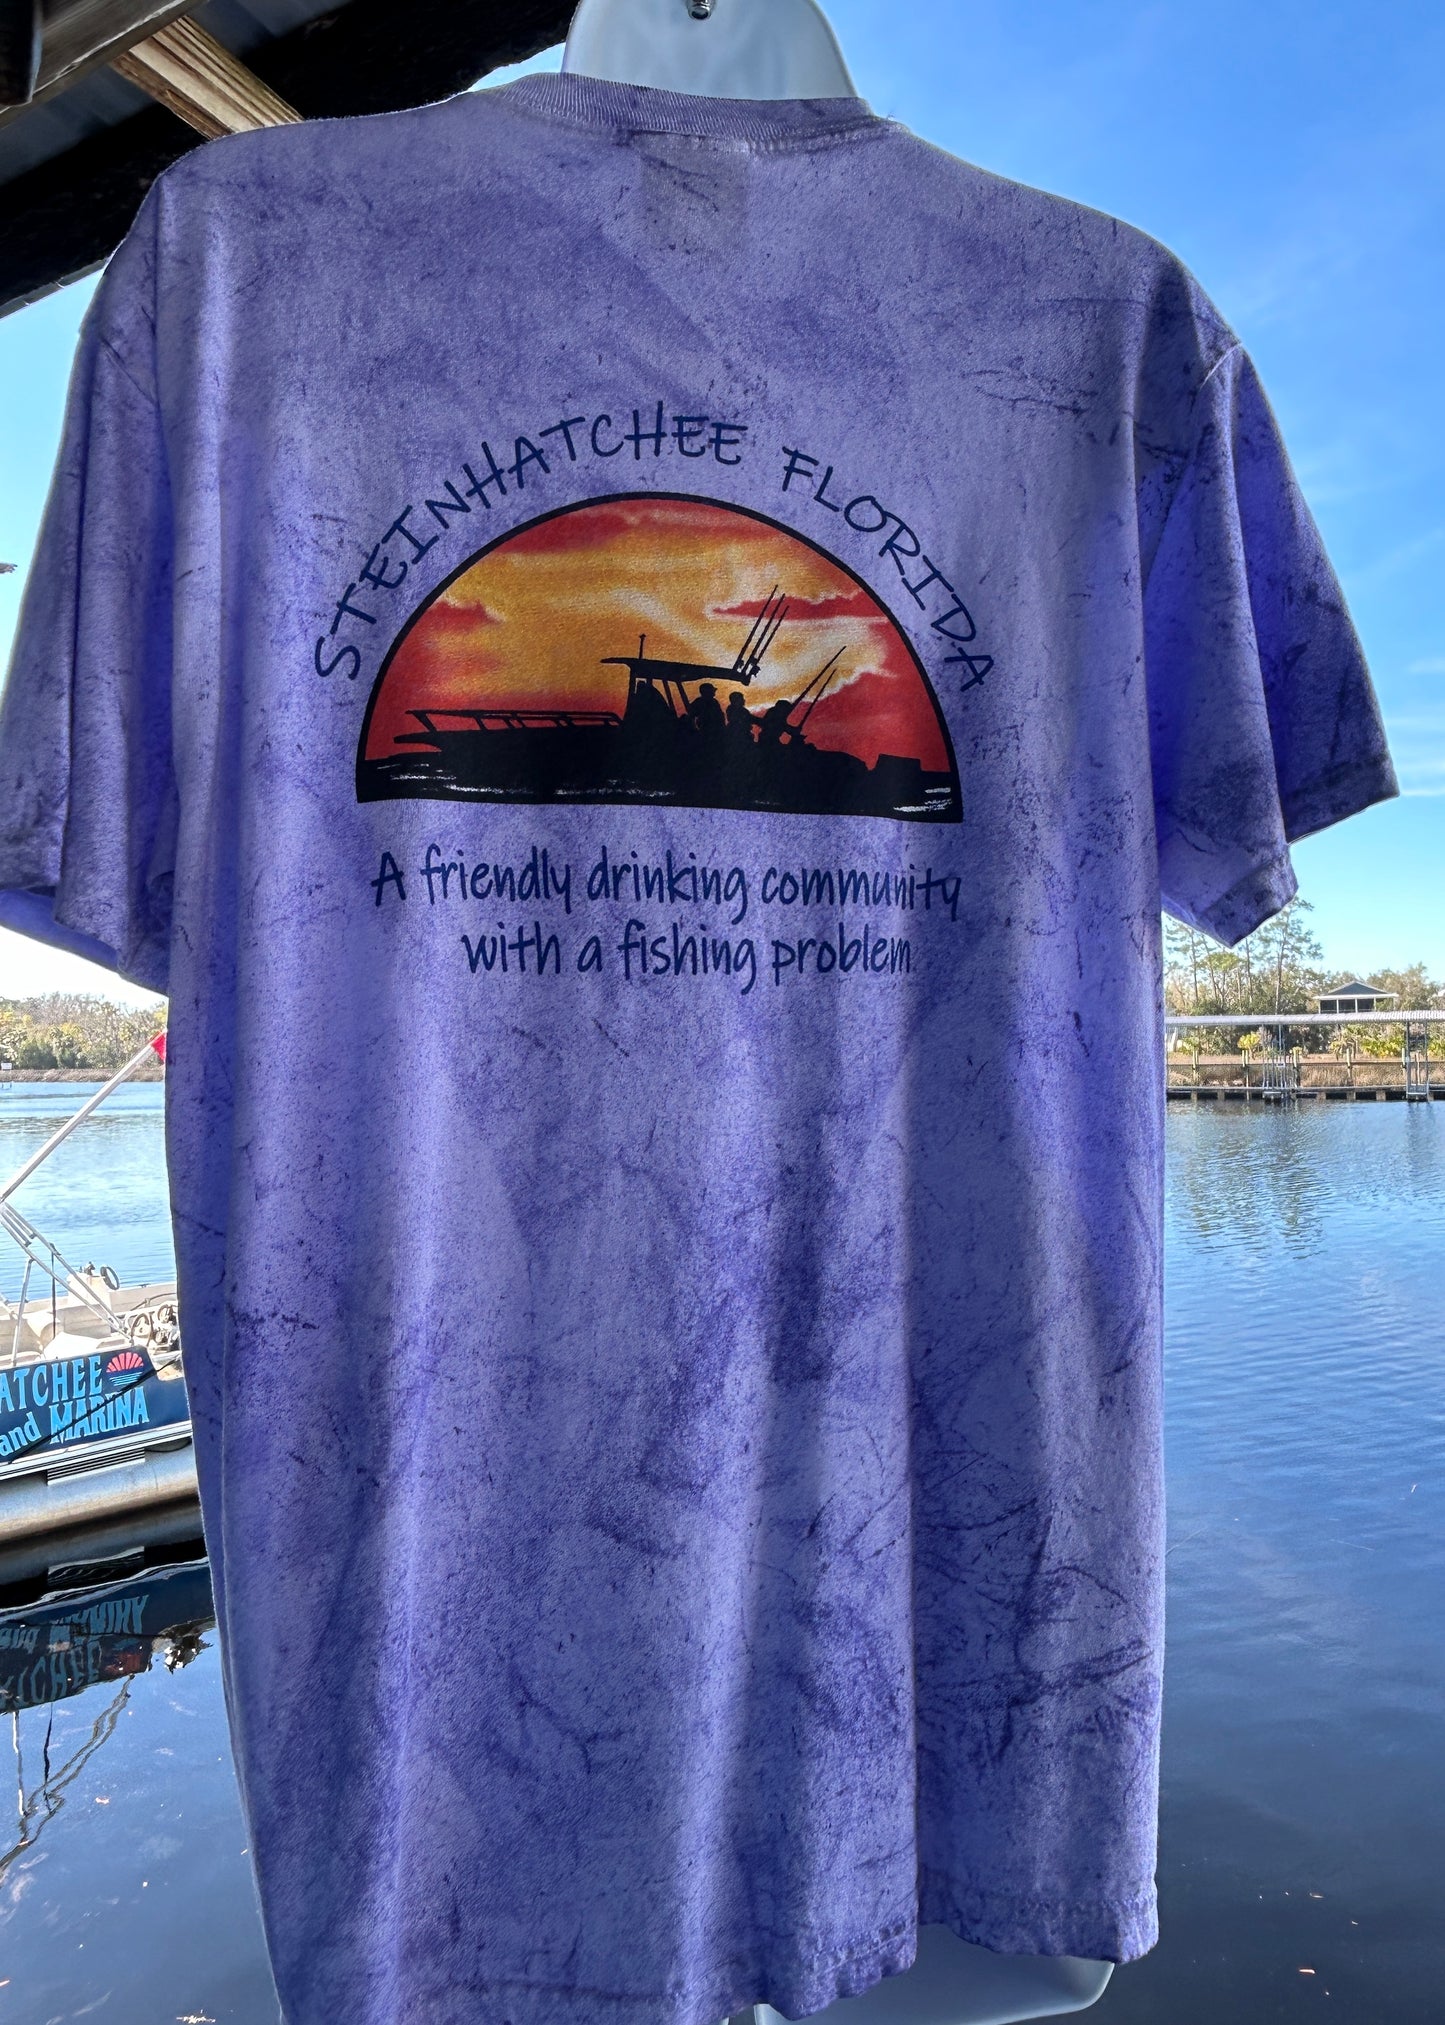 Comfort Colors “A Friendly Drinking Community with a Fishing Problem” Steinhatchee Florida Tshirt